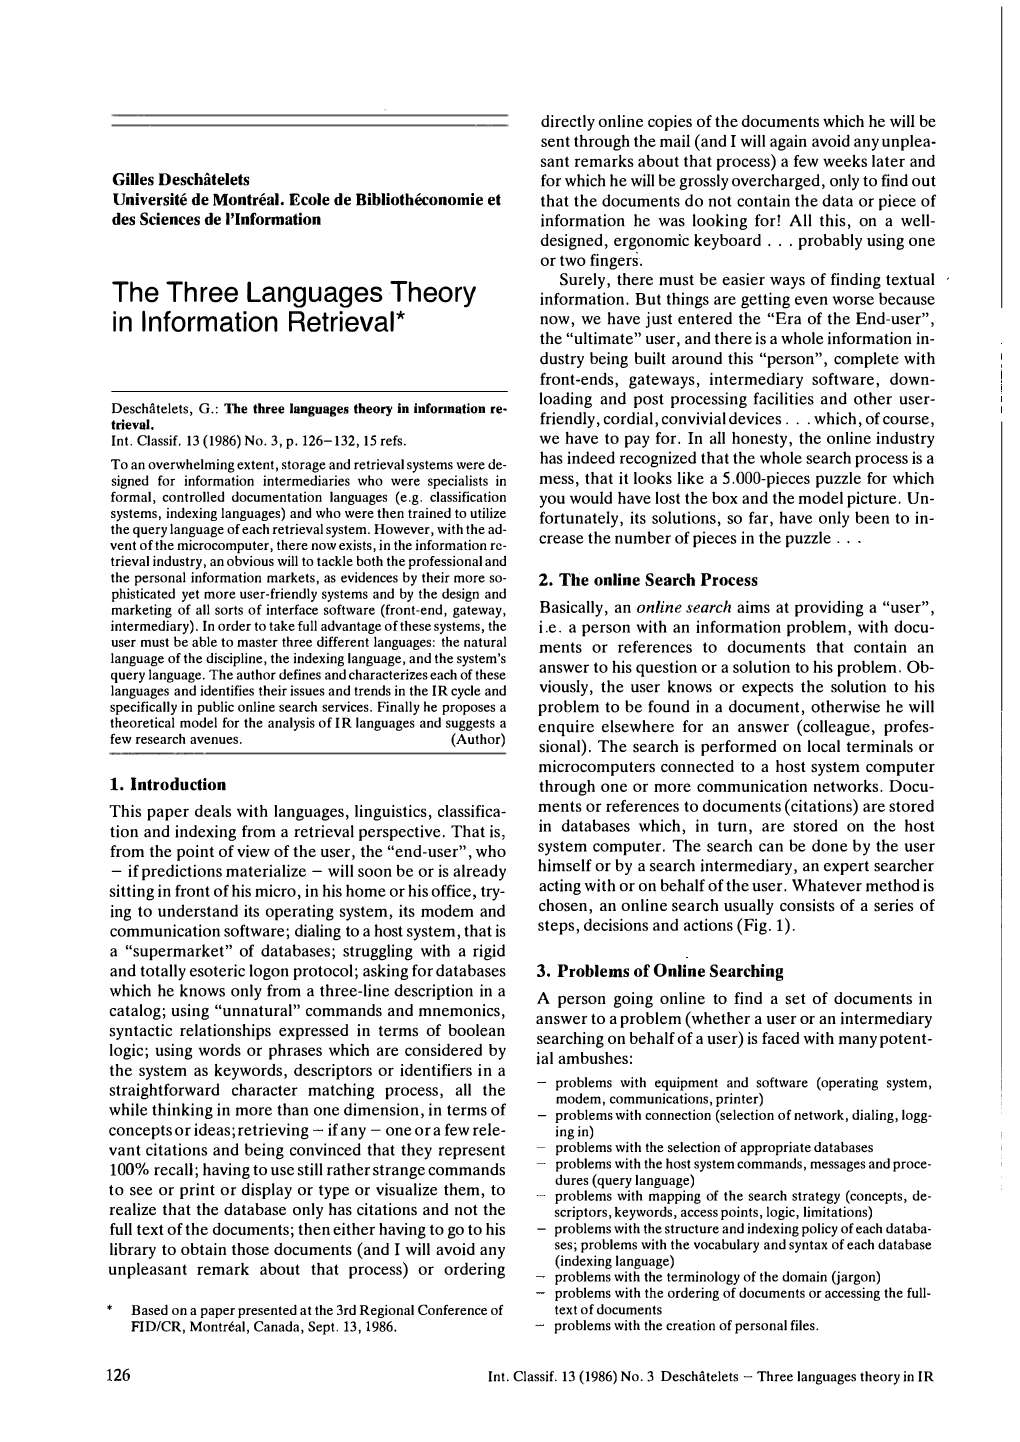 The Three Languages Theory in Information Retrieval*